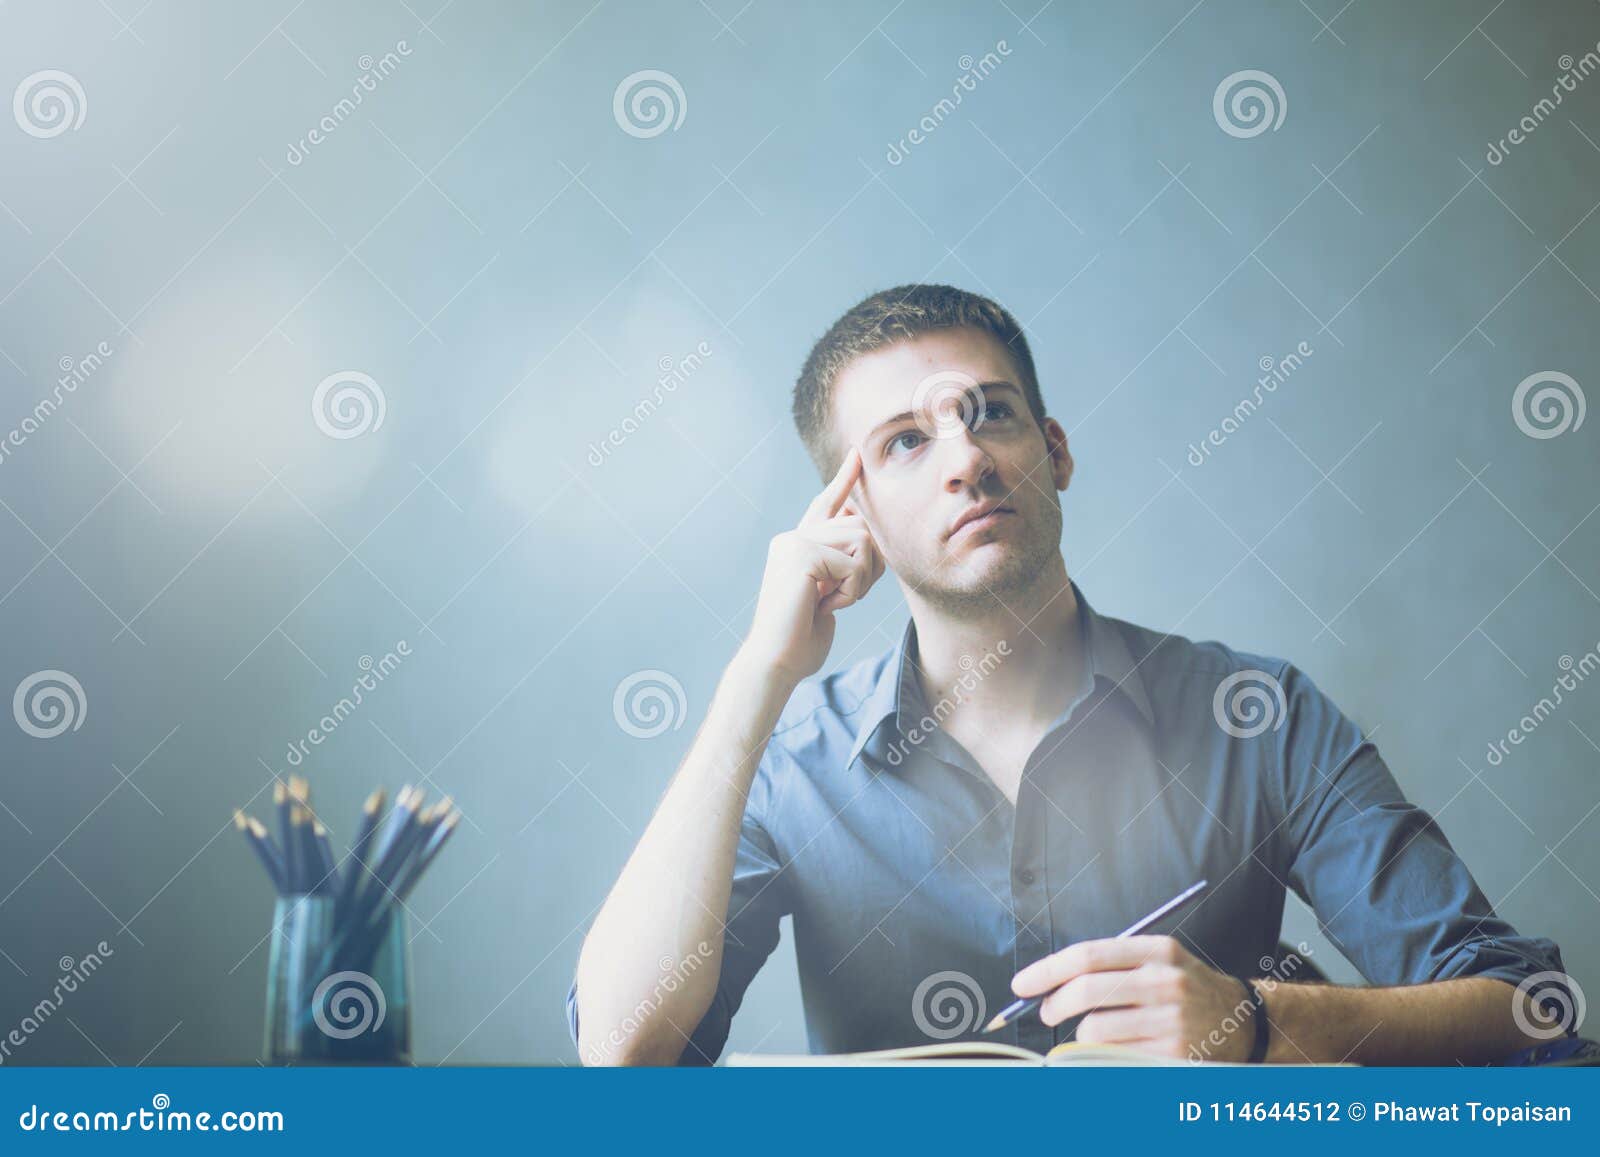 young businessman caucasians sitting at desk office table and taking notes in notebook. writing and looking to right hand side